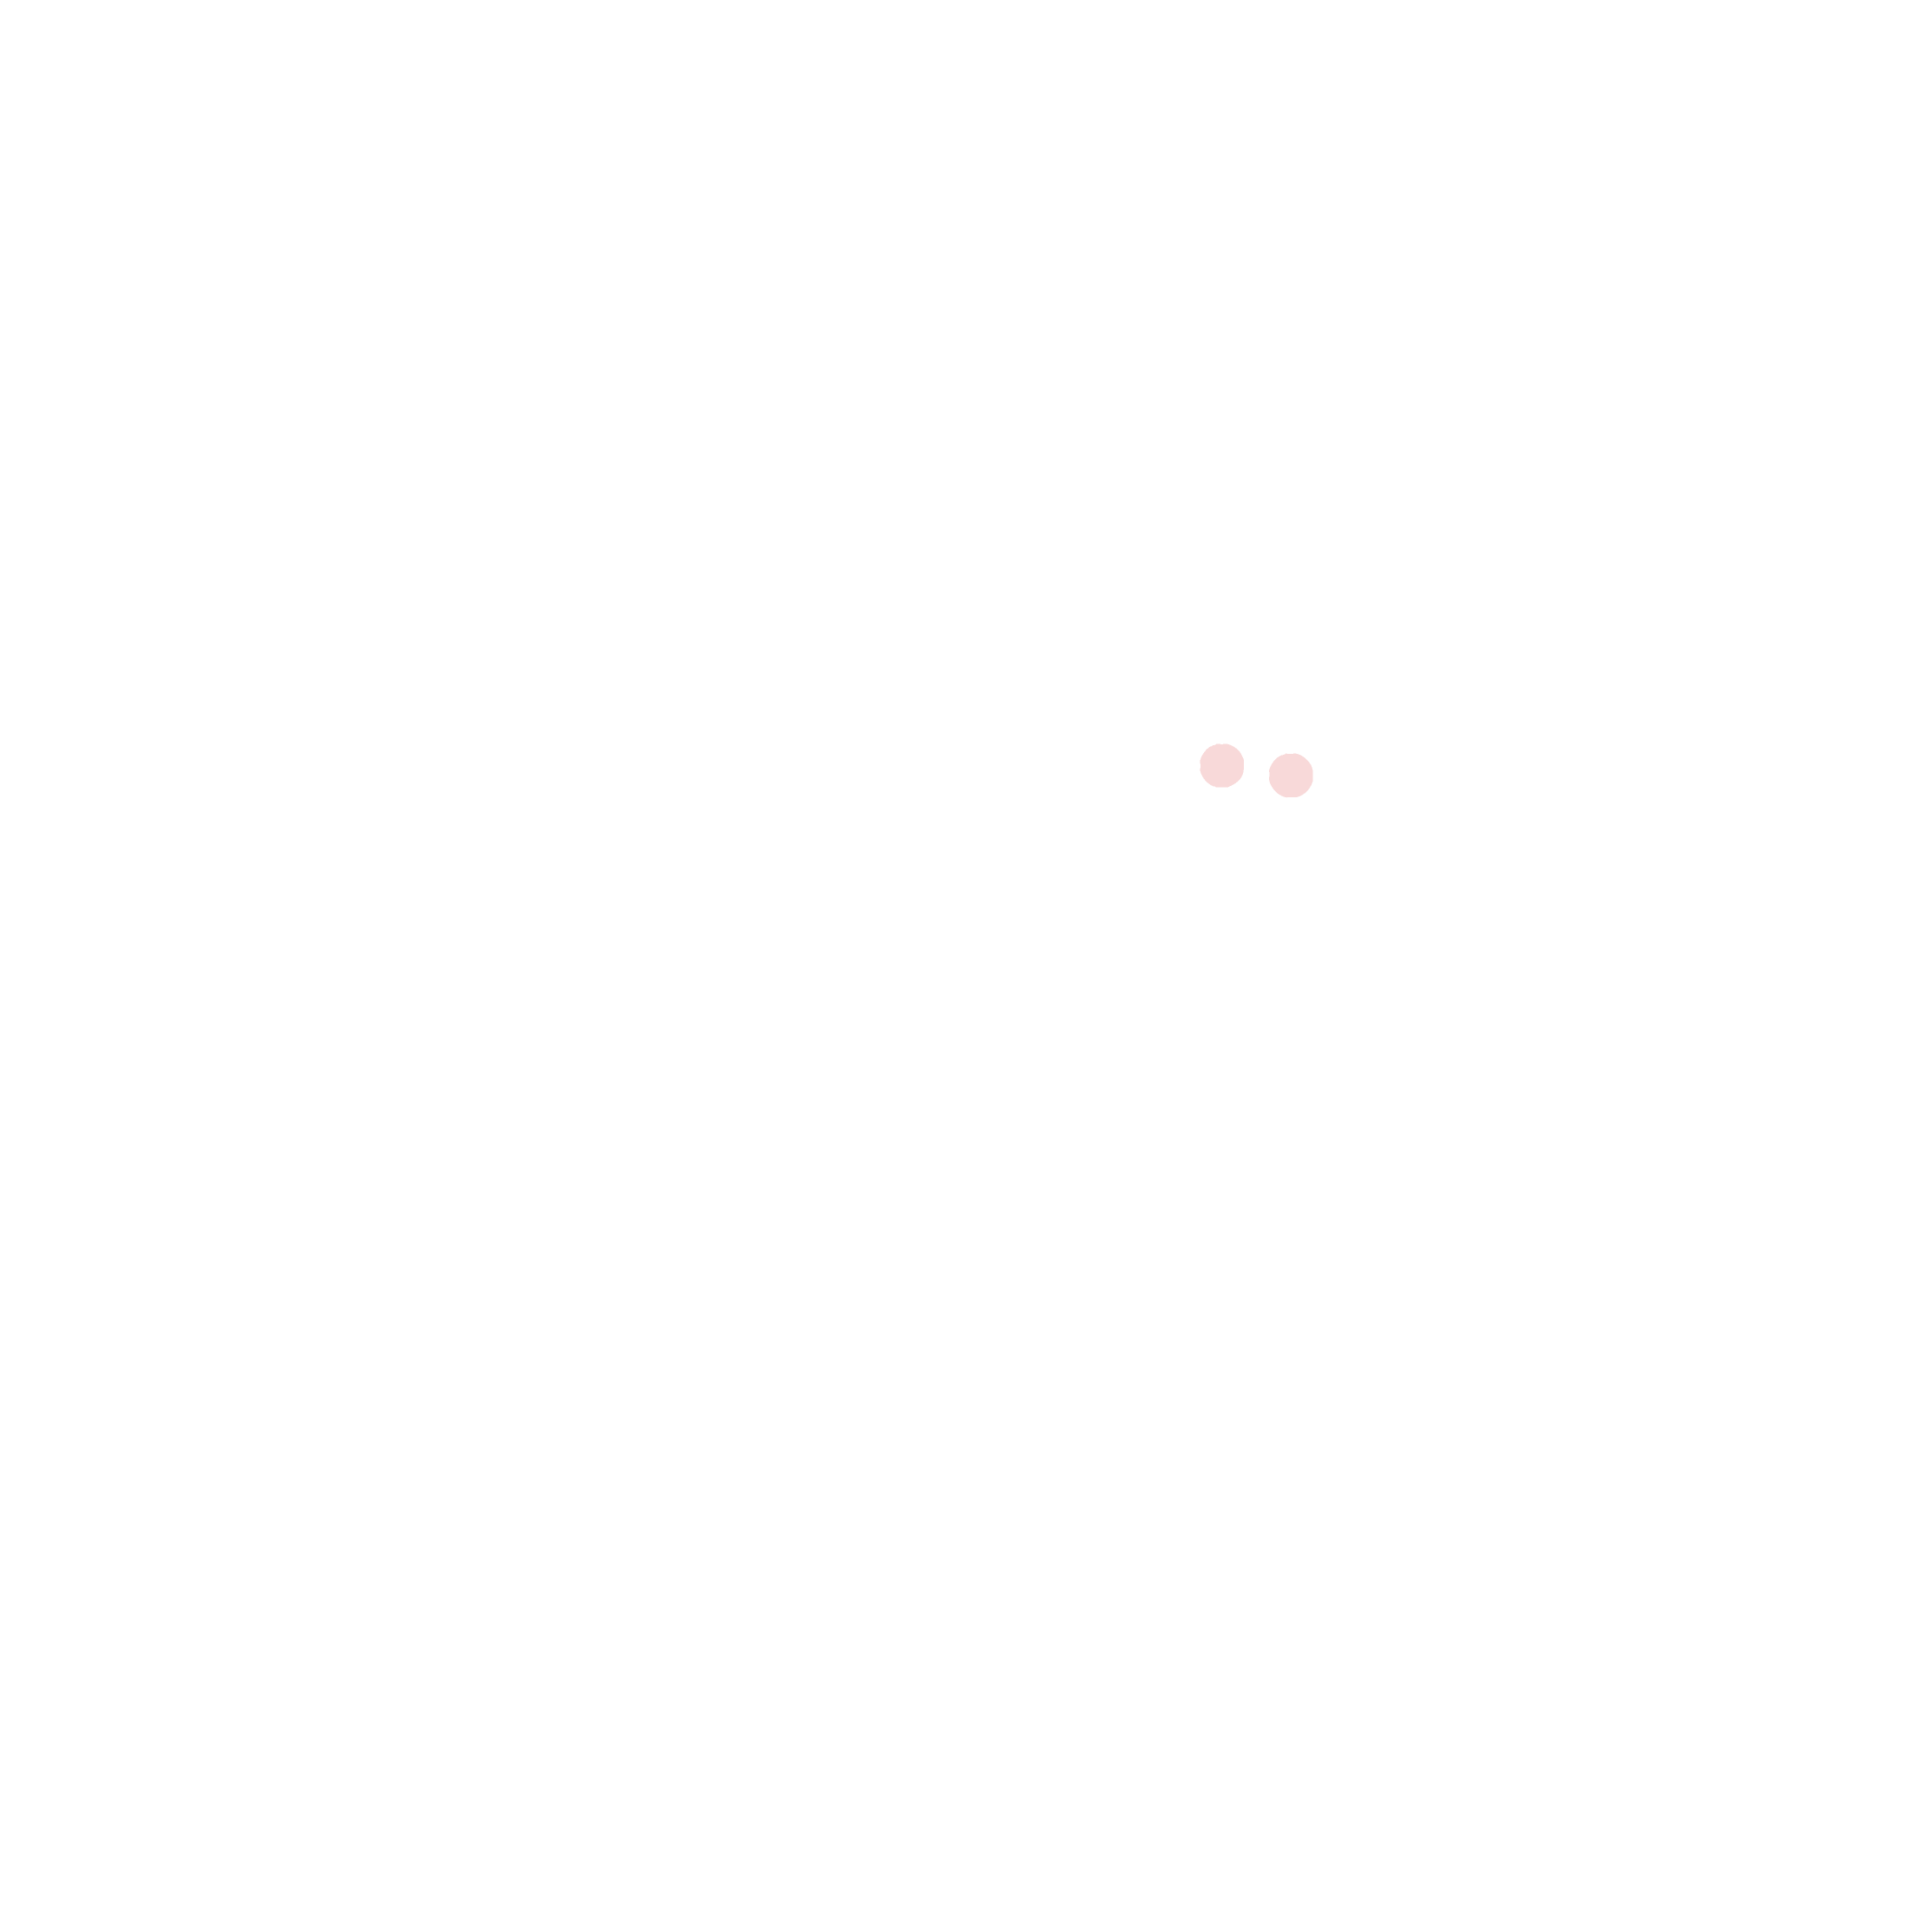 Kin Body & Sole Physiotherapy and Podiatry Clinic York